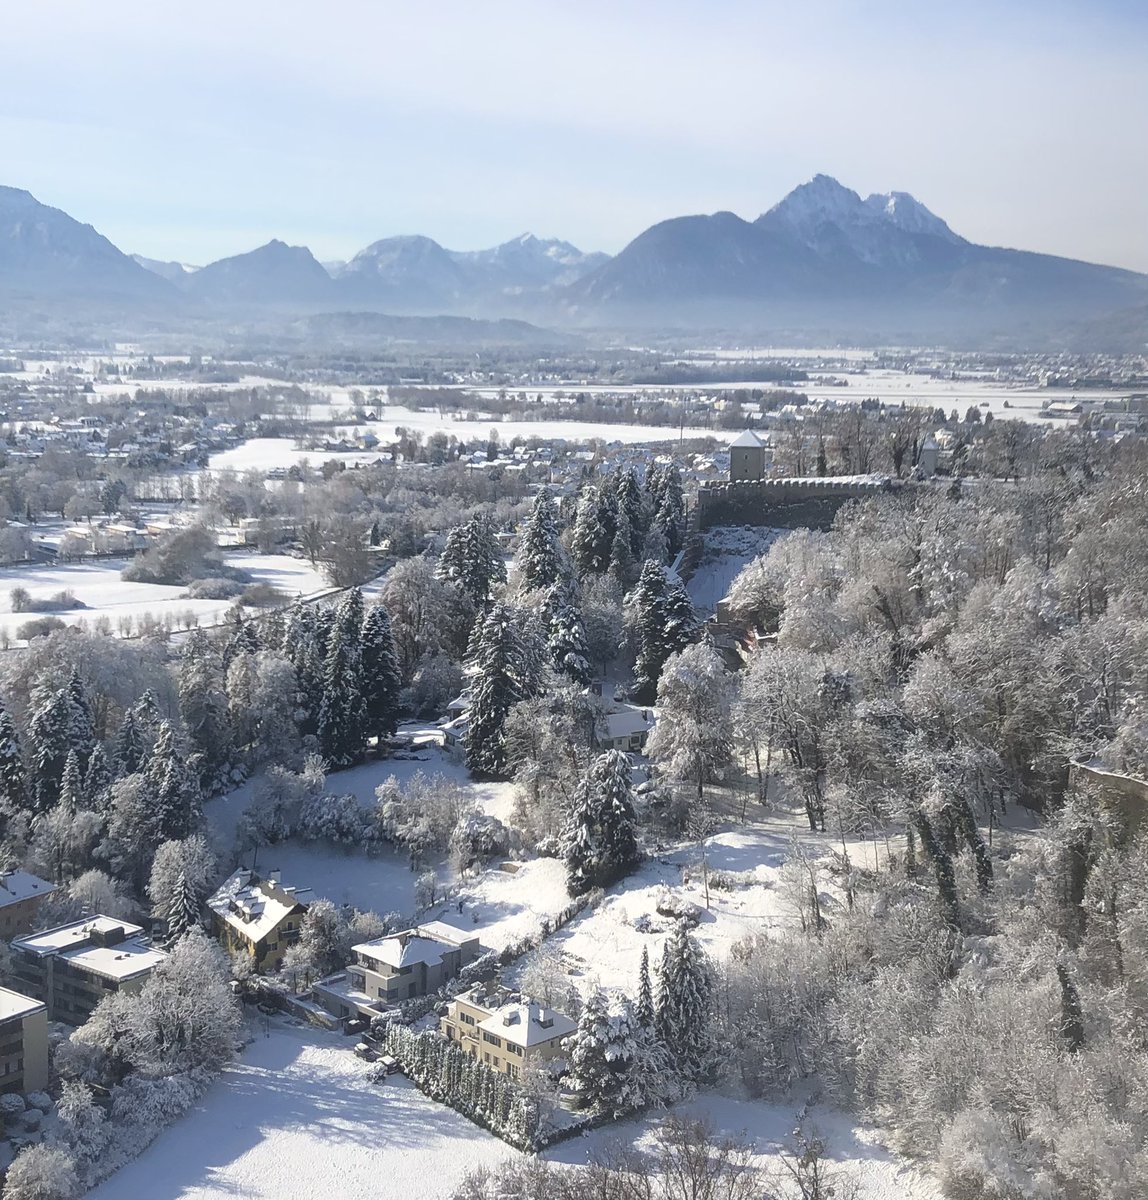 From Salzburg, Austria: a view from the Fortress. The castle contains the track of one of the oldest operational cable railways in the world, the Reisszug. This was operational as early as 1500. The current Festungsbahn funicular railway was built at the castle in 1892.